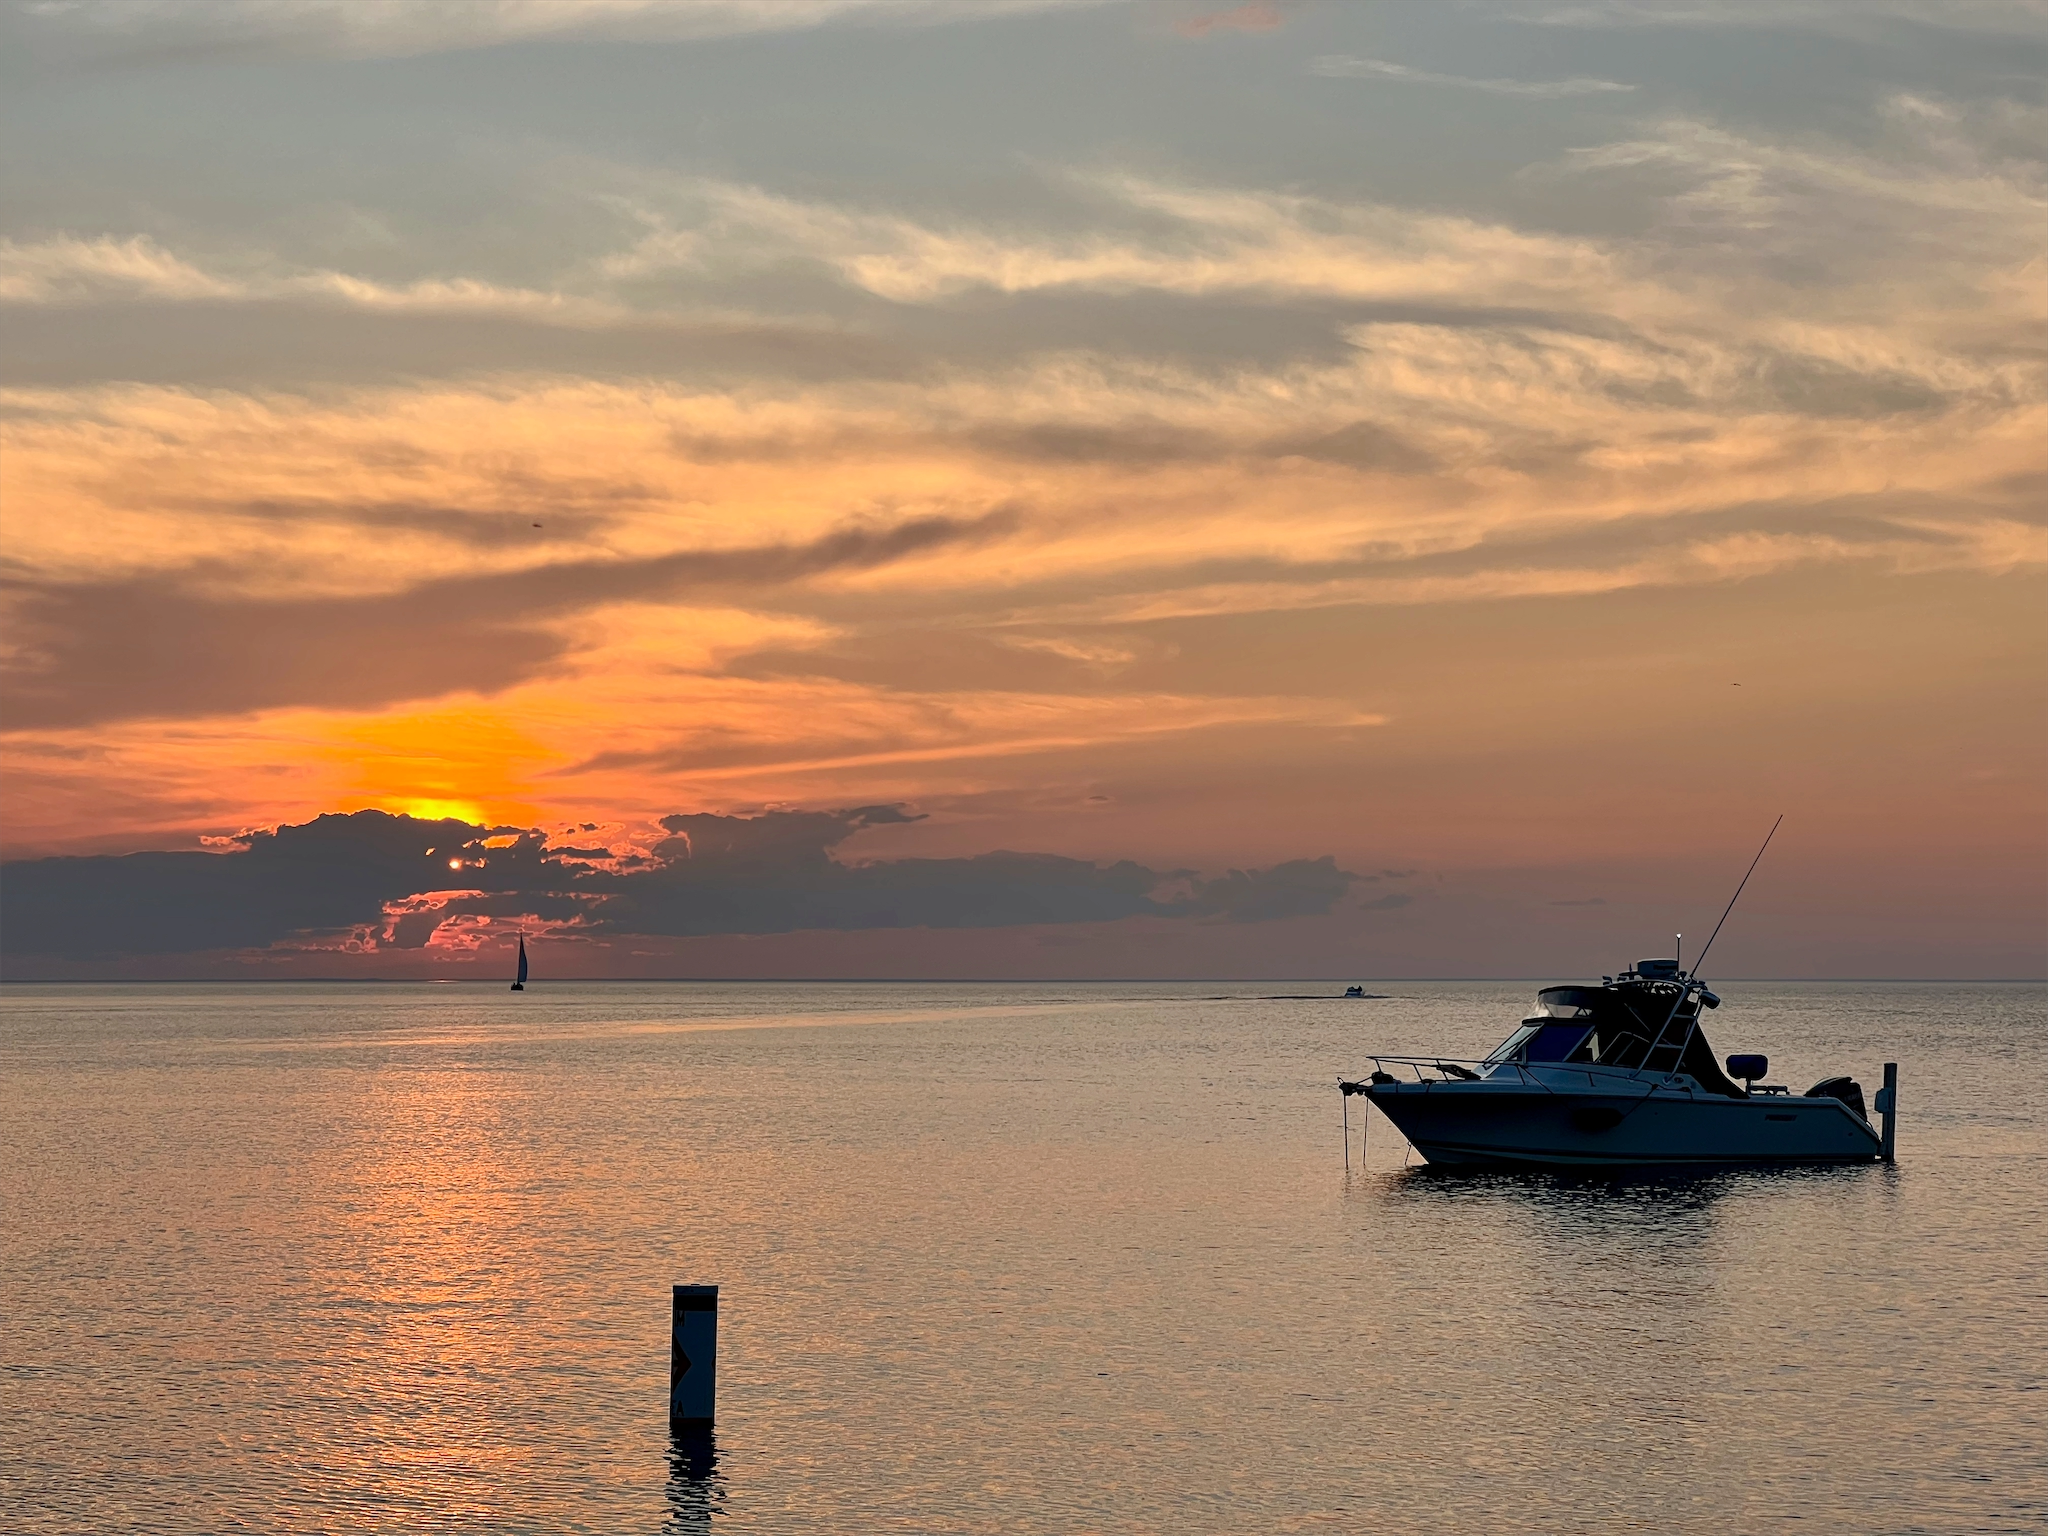 Sunset on one of the Great Lakes (the sun covered by clouds, casting a yellow-orange glow across the sky), with a sailboat in the distance and a fishing boat in the forground.